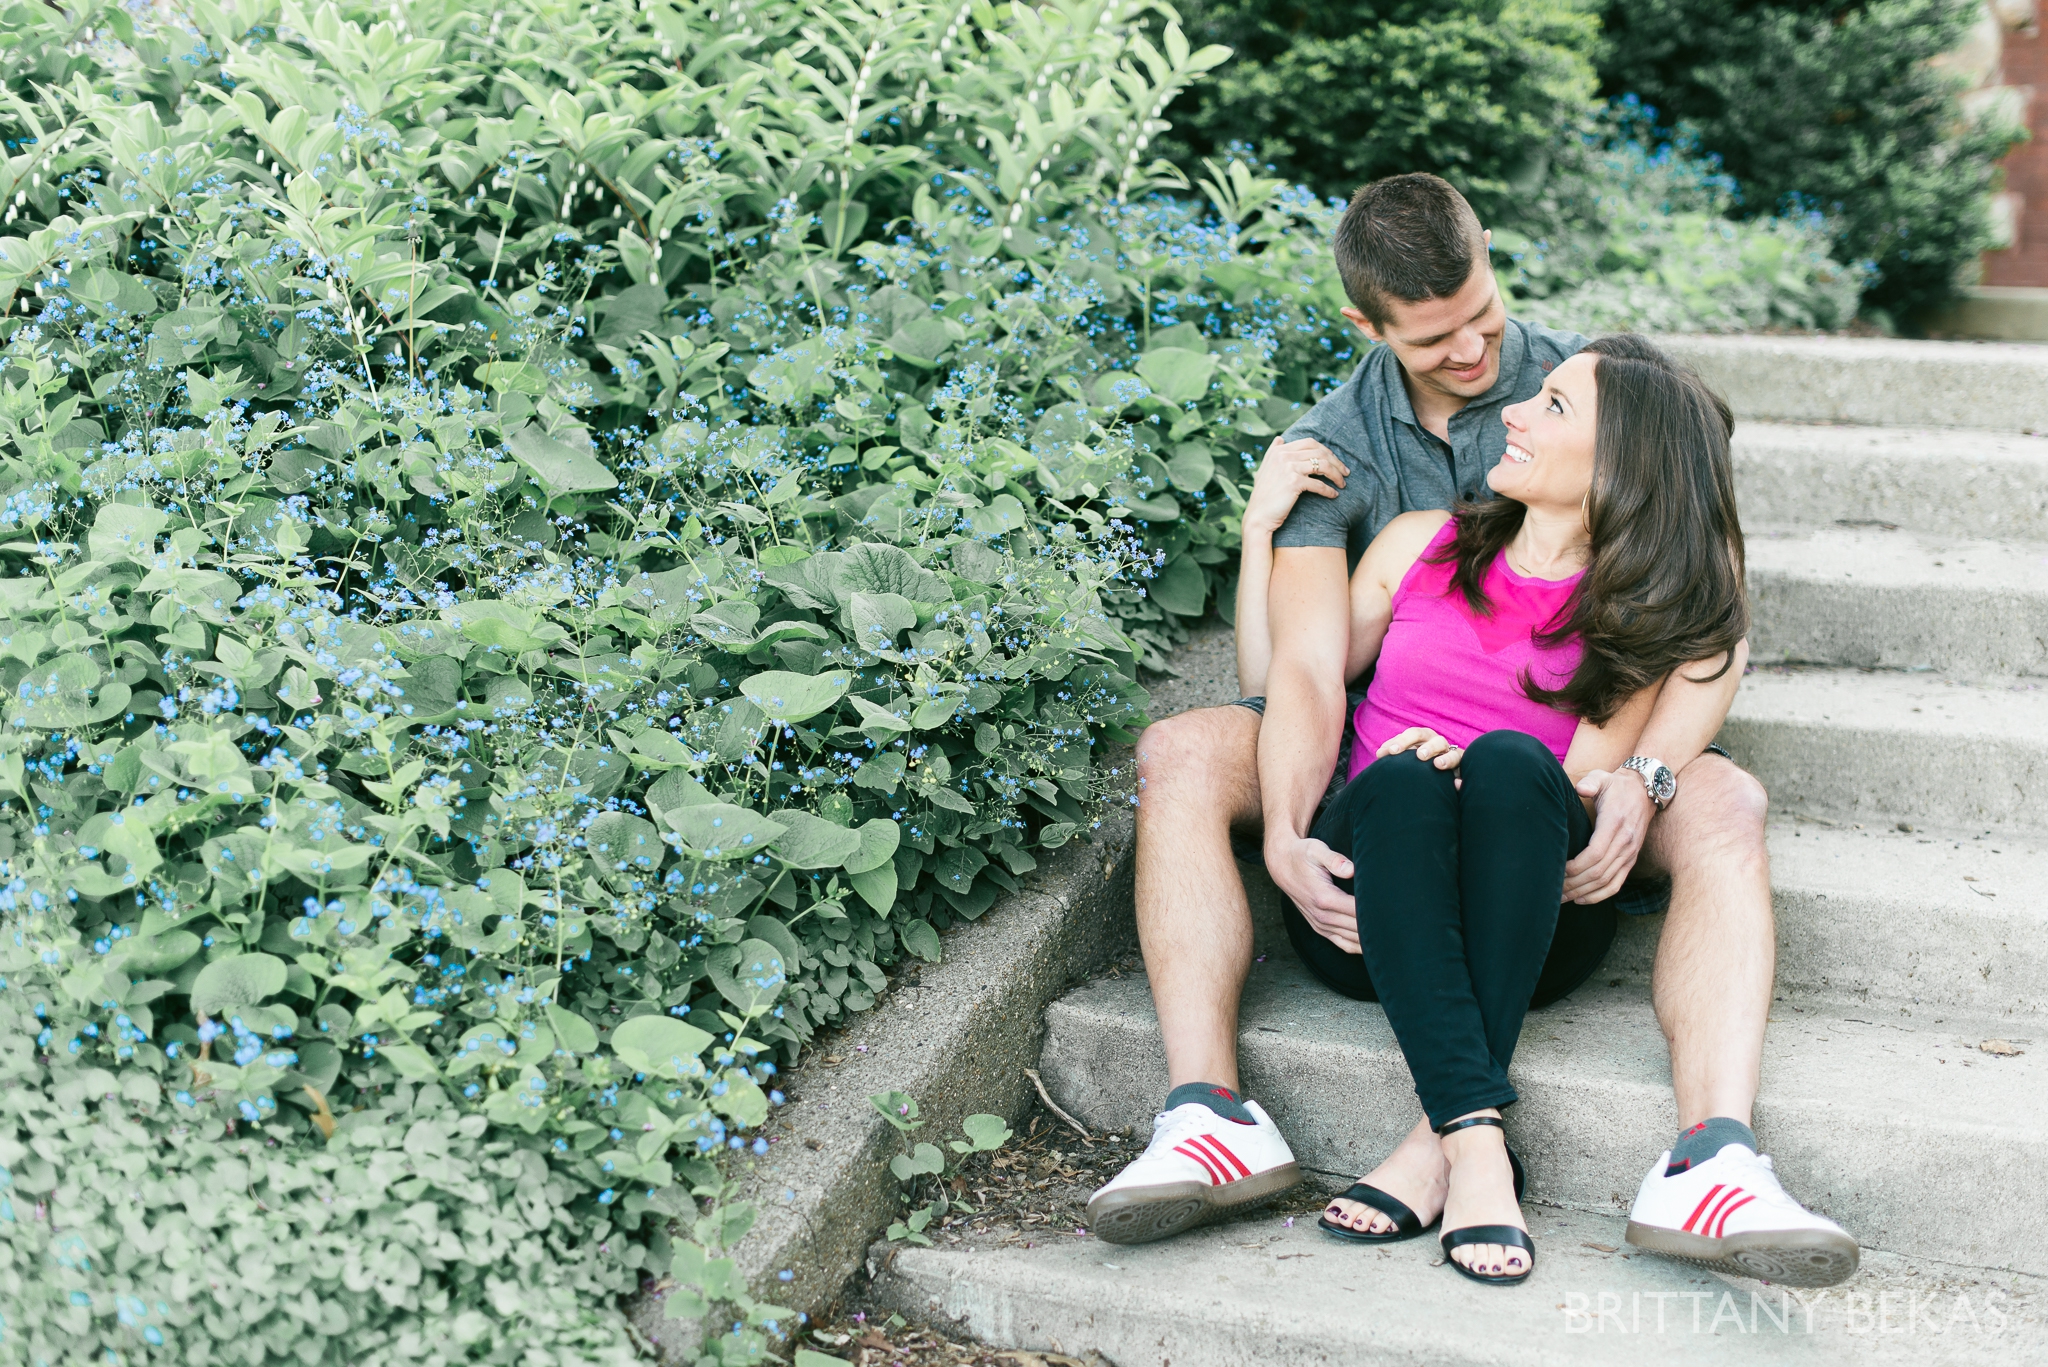 Chicago Engagement - Lincoln Park Engagement Photos - Brittany Bekas Photography_0007